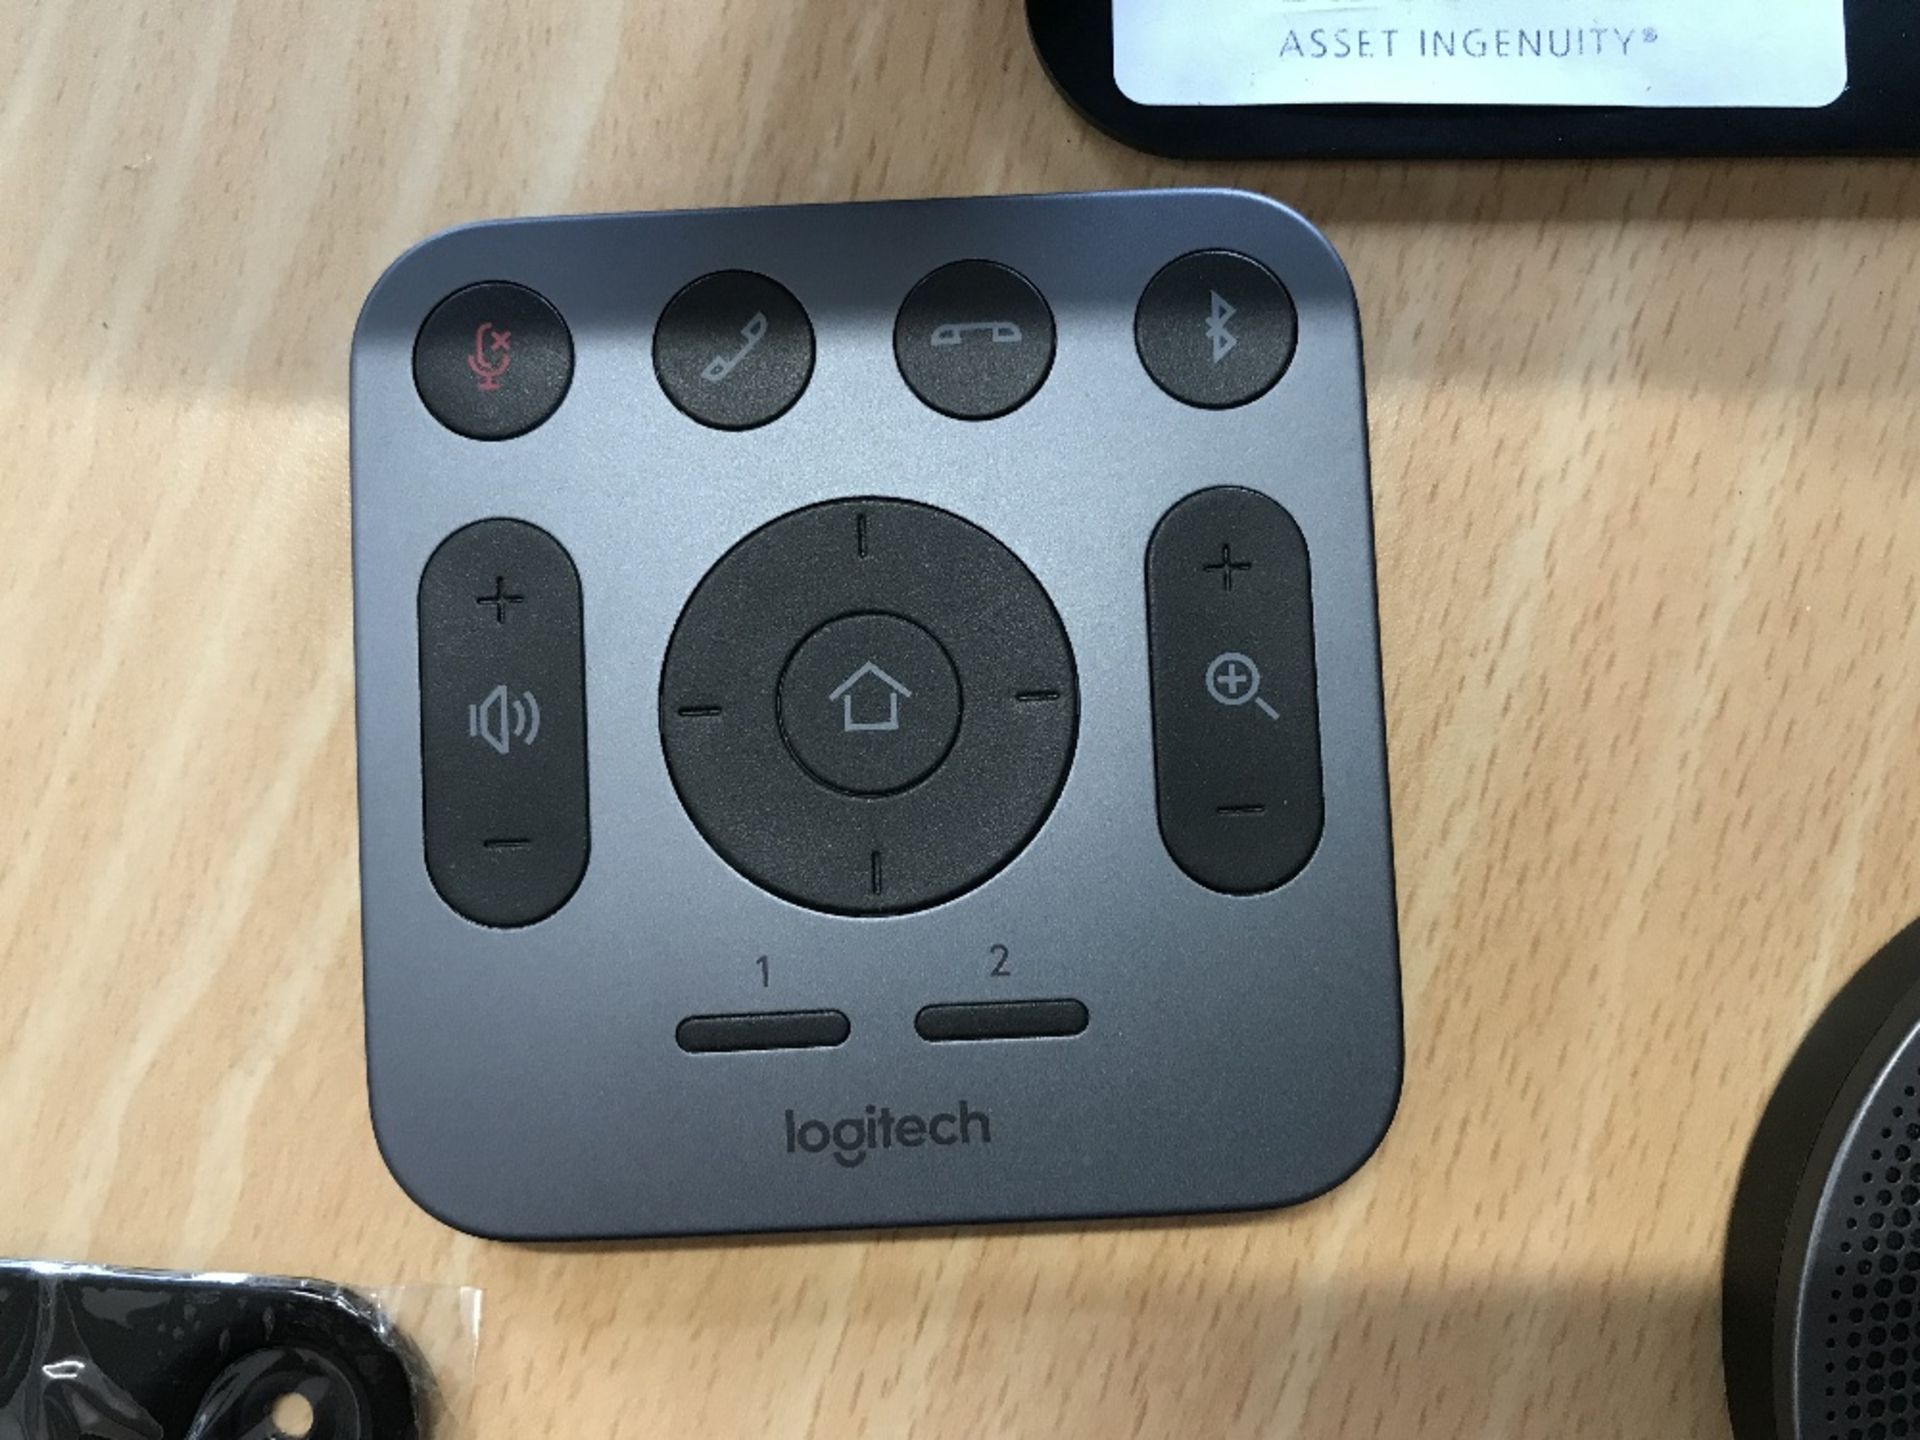 Logitech Meetup Camera And Speaker Phone Unit With Contents - Image 3 of 7